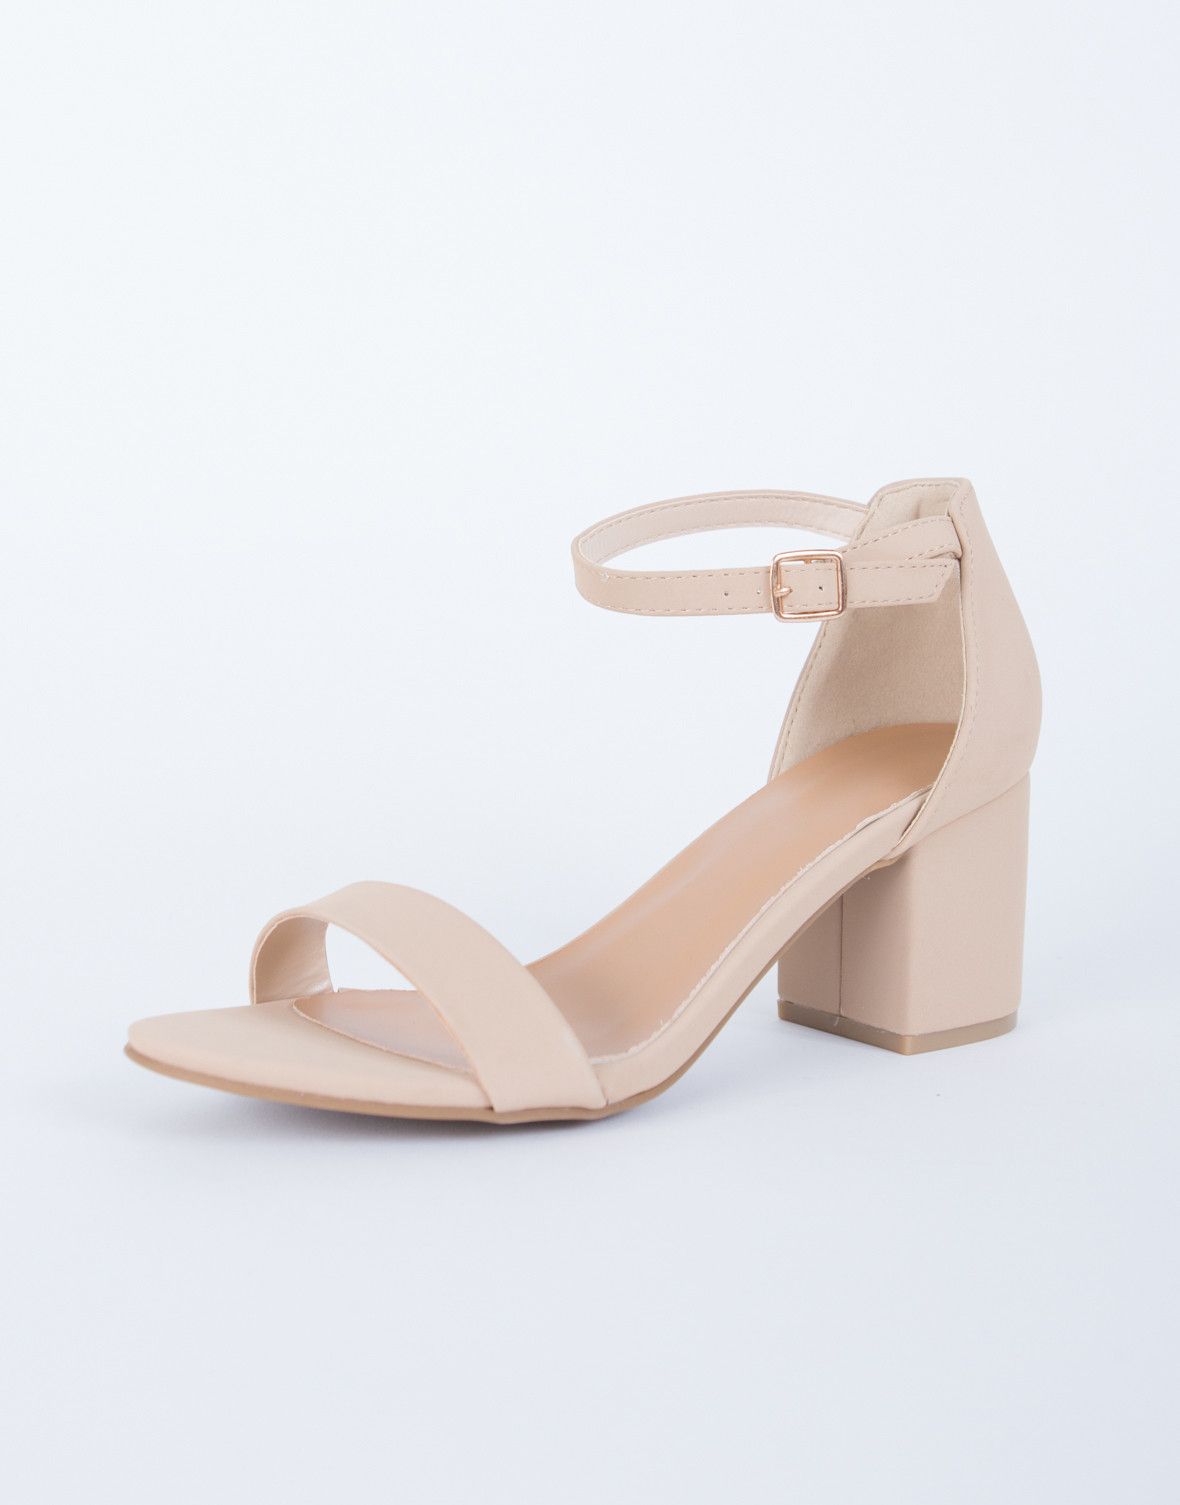 Ankle Strapped Block Heel Sandals